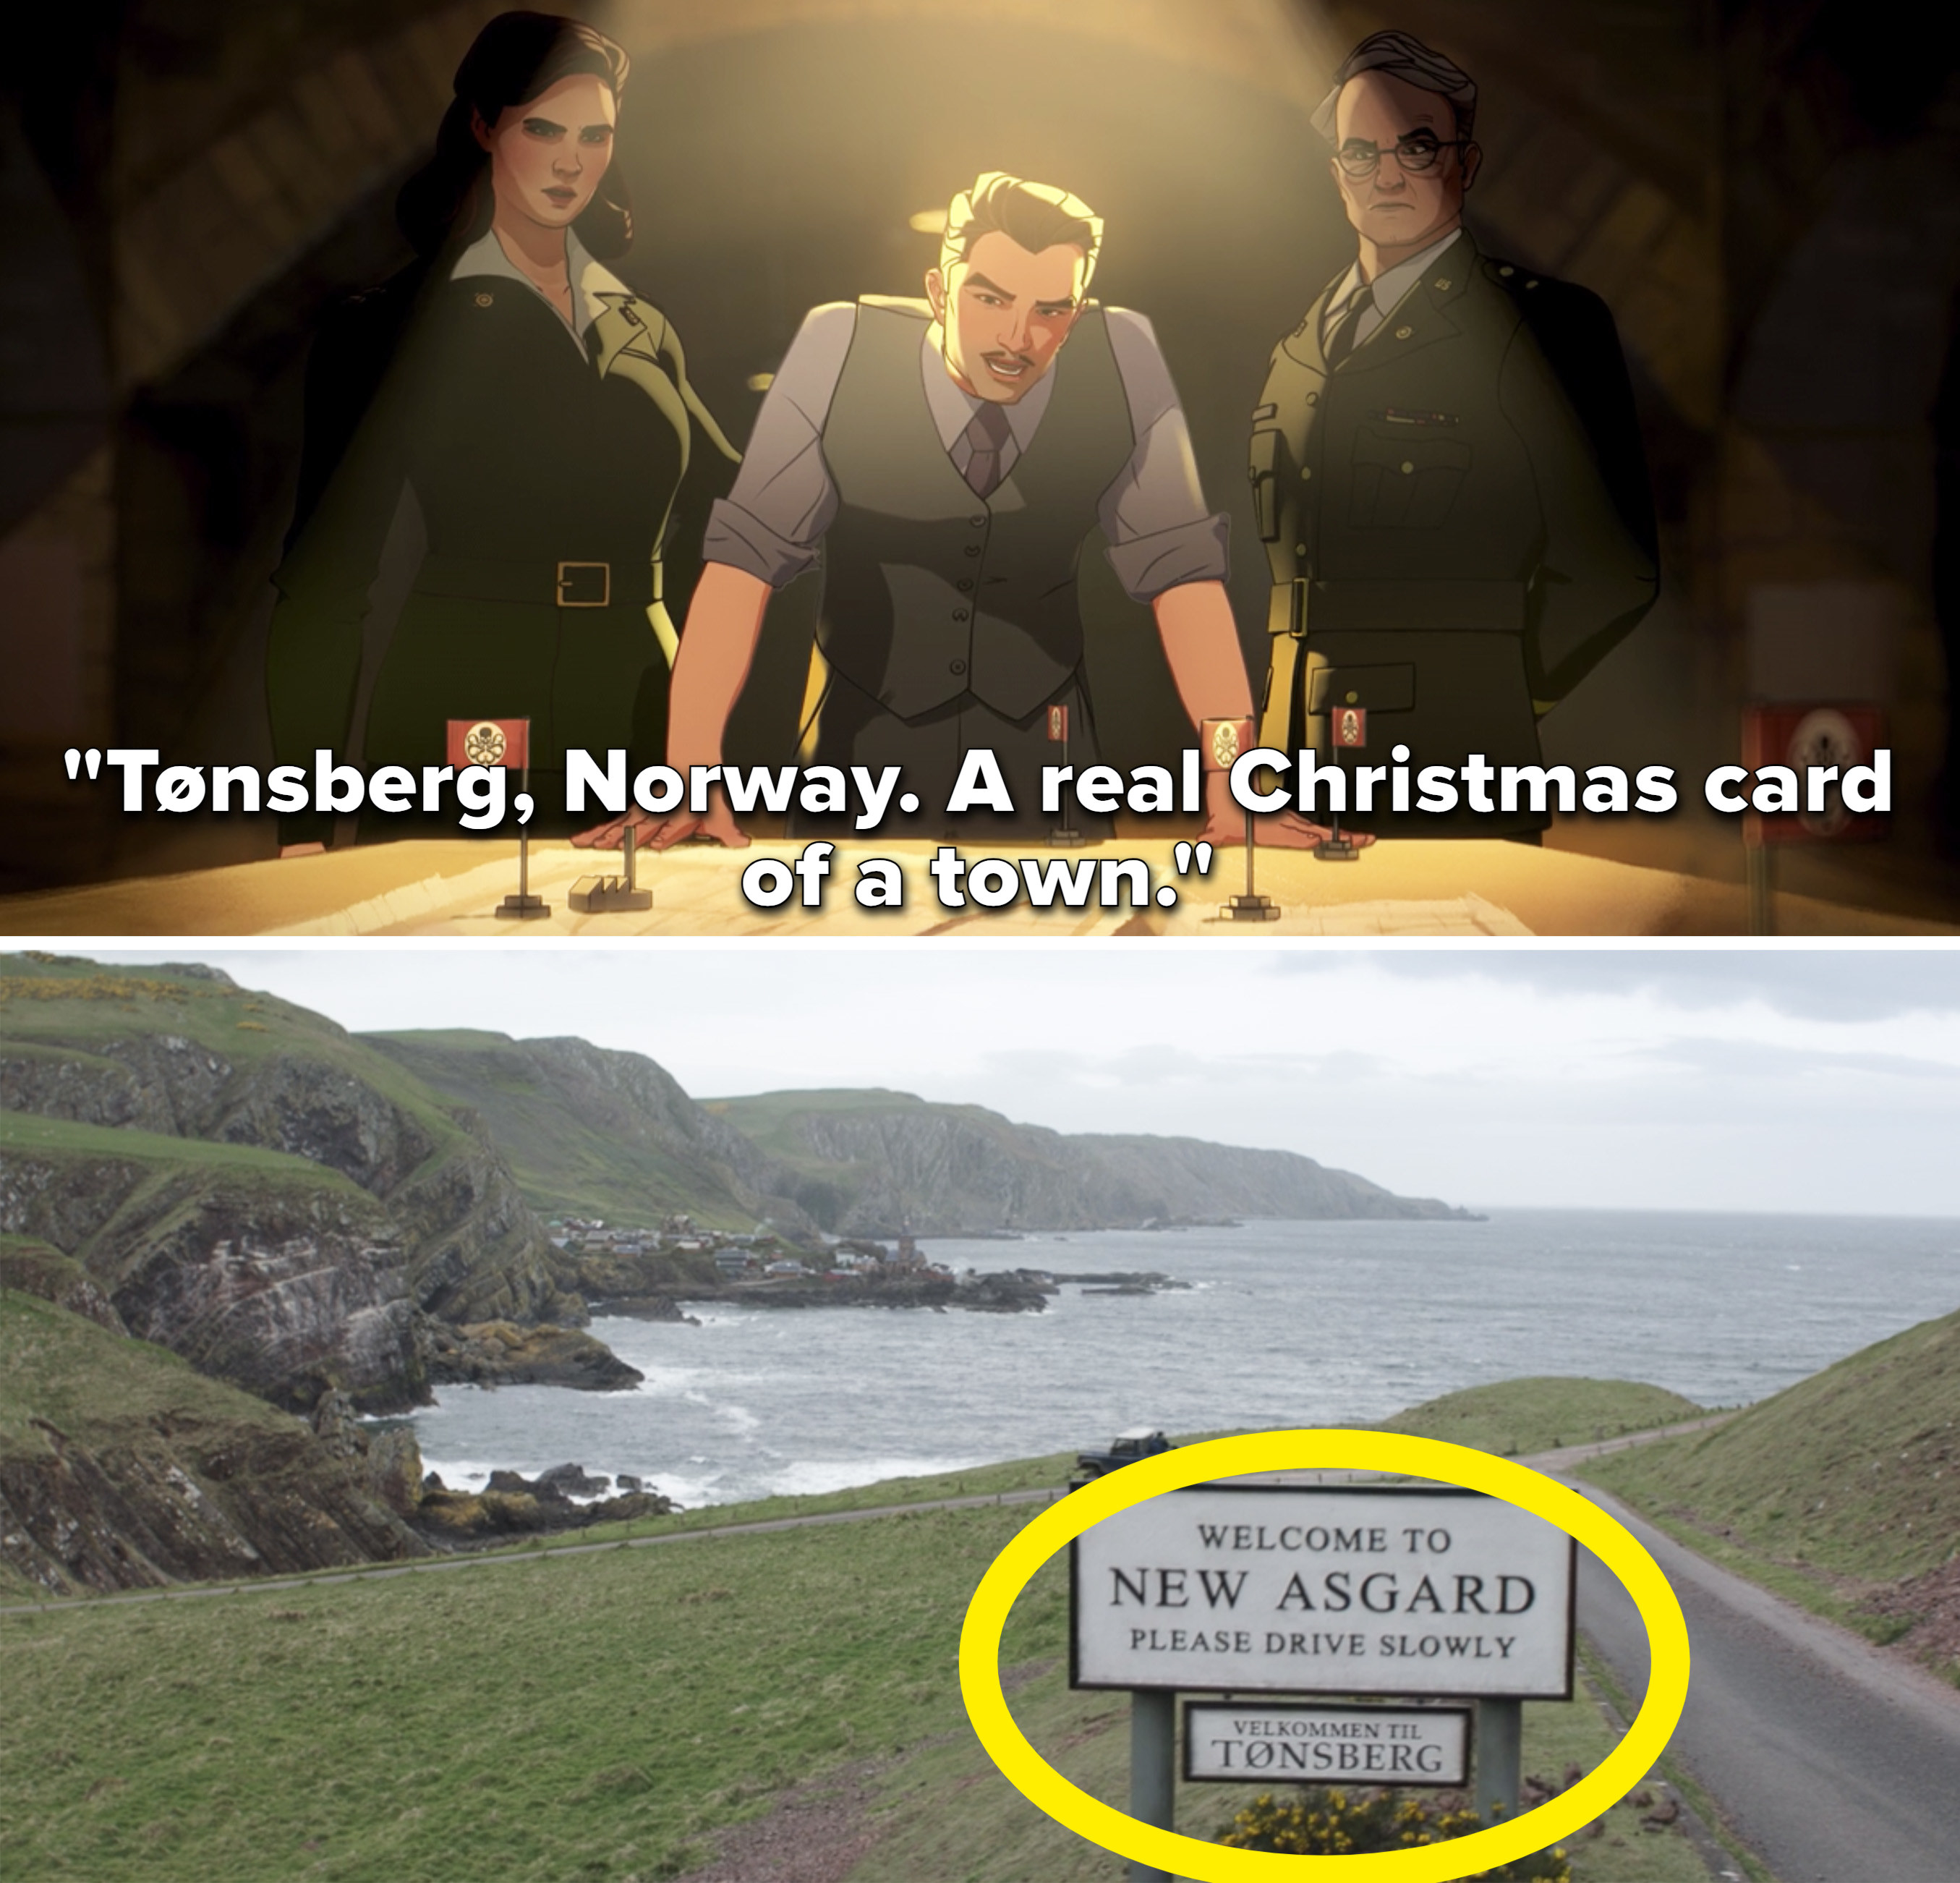 Howard Stark saying, &quot;Tønsberg, Norway. A real Christmas card of a town&quot;